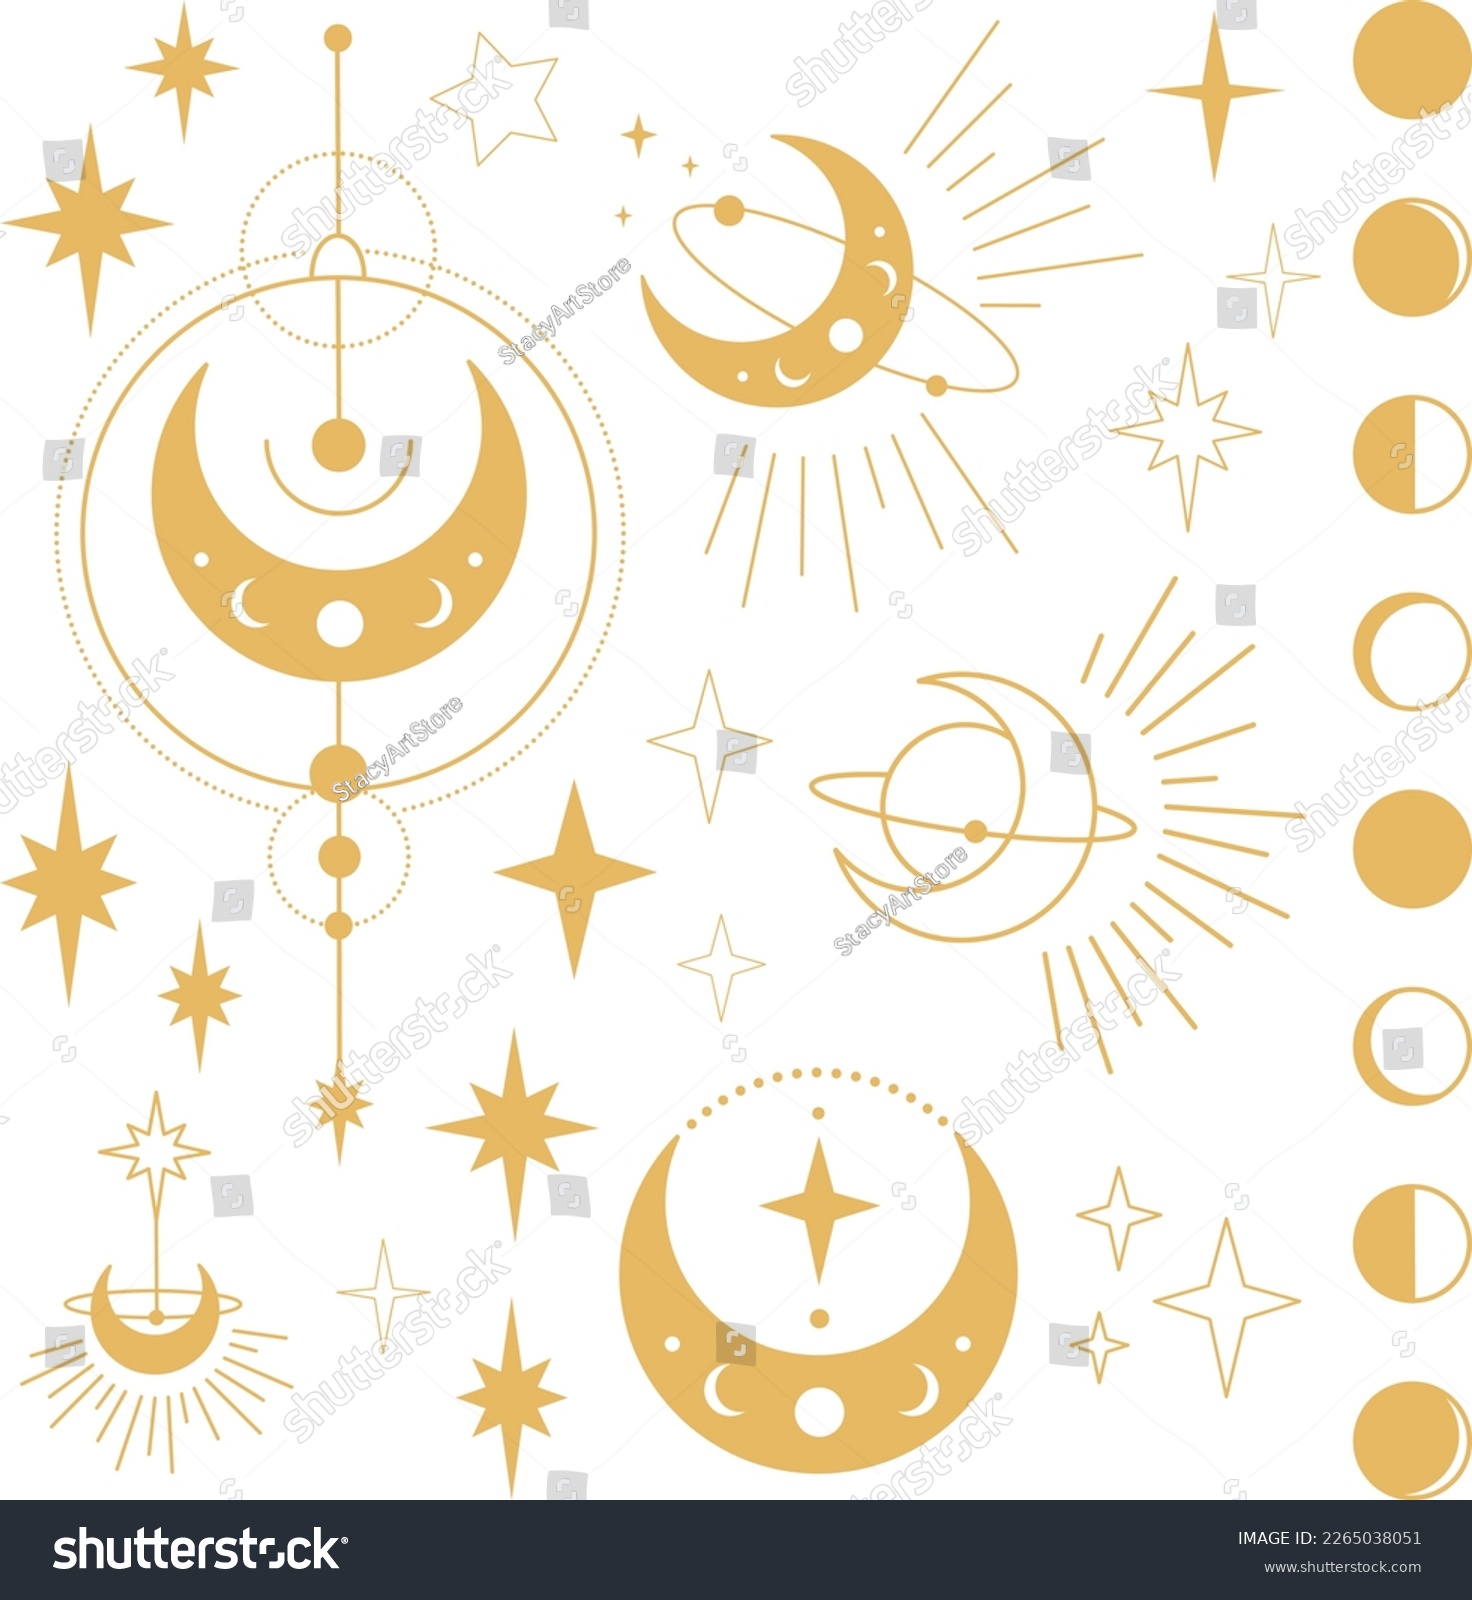 SVG of Bohemian Gold Crescent Moon with Stars and Rays Astrology Illustrations. Moon Phases SVG Vector Clipart. Celestial, Mystical, Esoteric designs perfect for Printing. T-shirt, Mugs, Cut Boards Cut File  svg